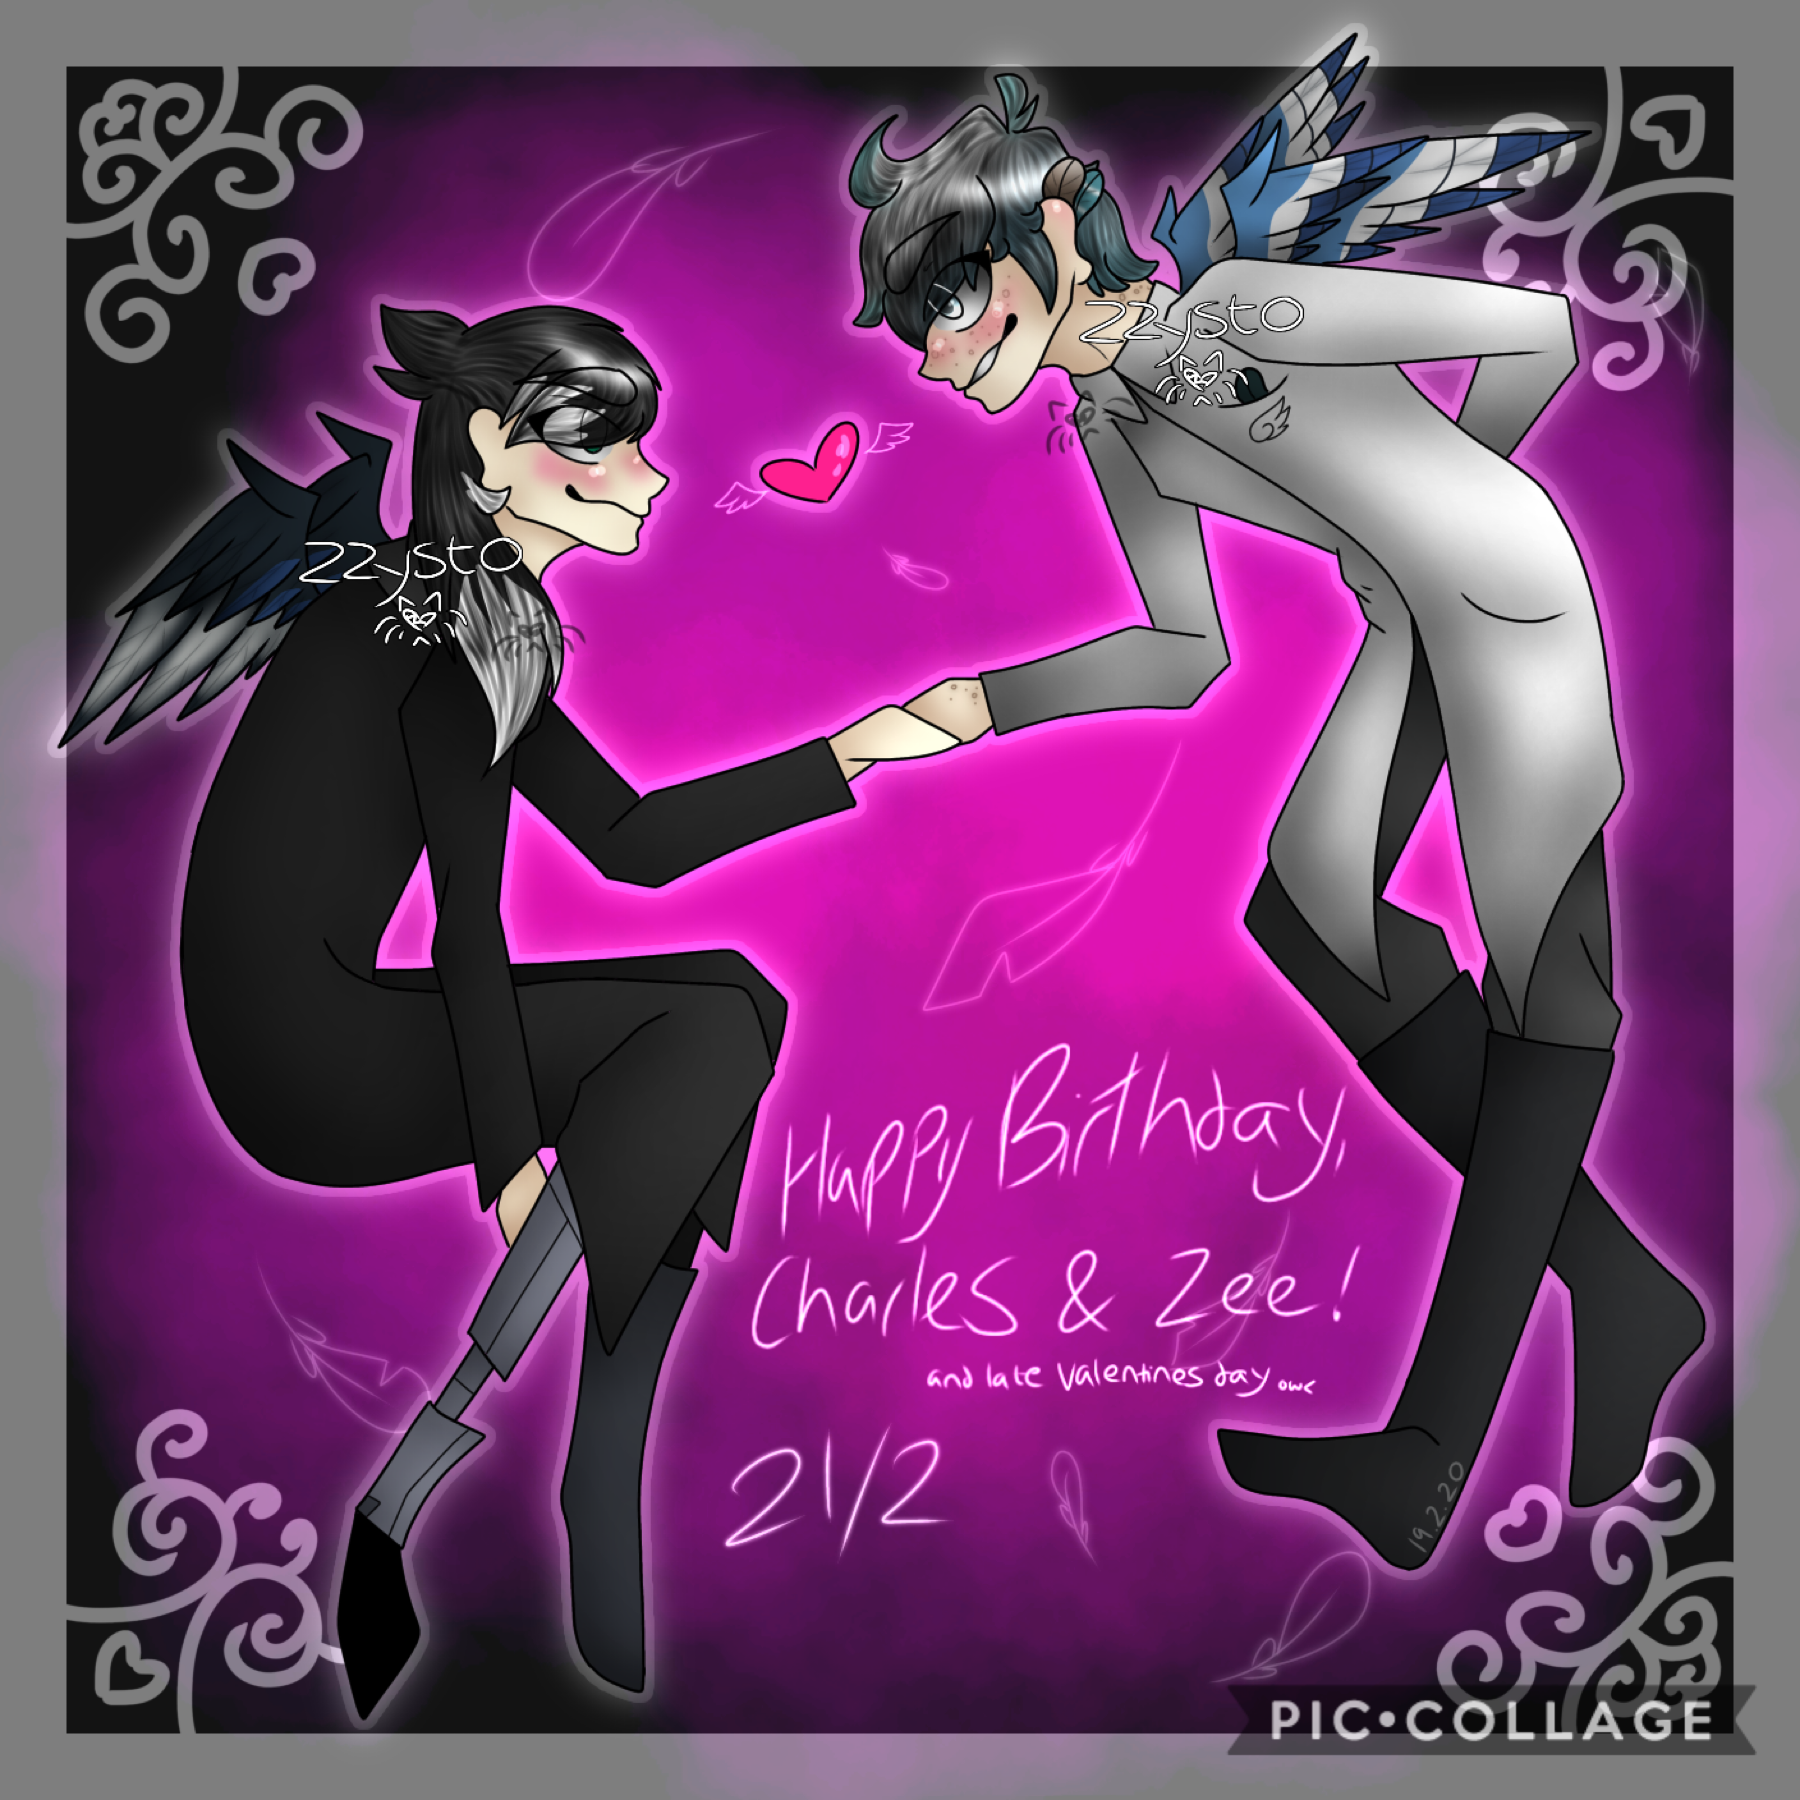 💞Tap💞
~Look in remixes yo-
a hAPPY BORTHDAY TO MY GORGEOUS BOIS-
I can’t believe it’s been a year qwq it feels as if I created Charles yesterdAY
ee op this is a birthday gift for Alazel’s oc Zee as well as a late Valentine’s gift :’)